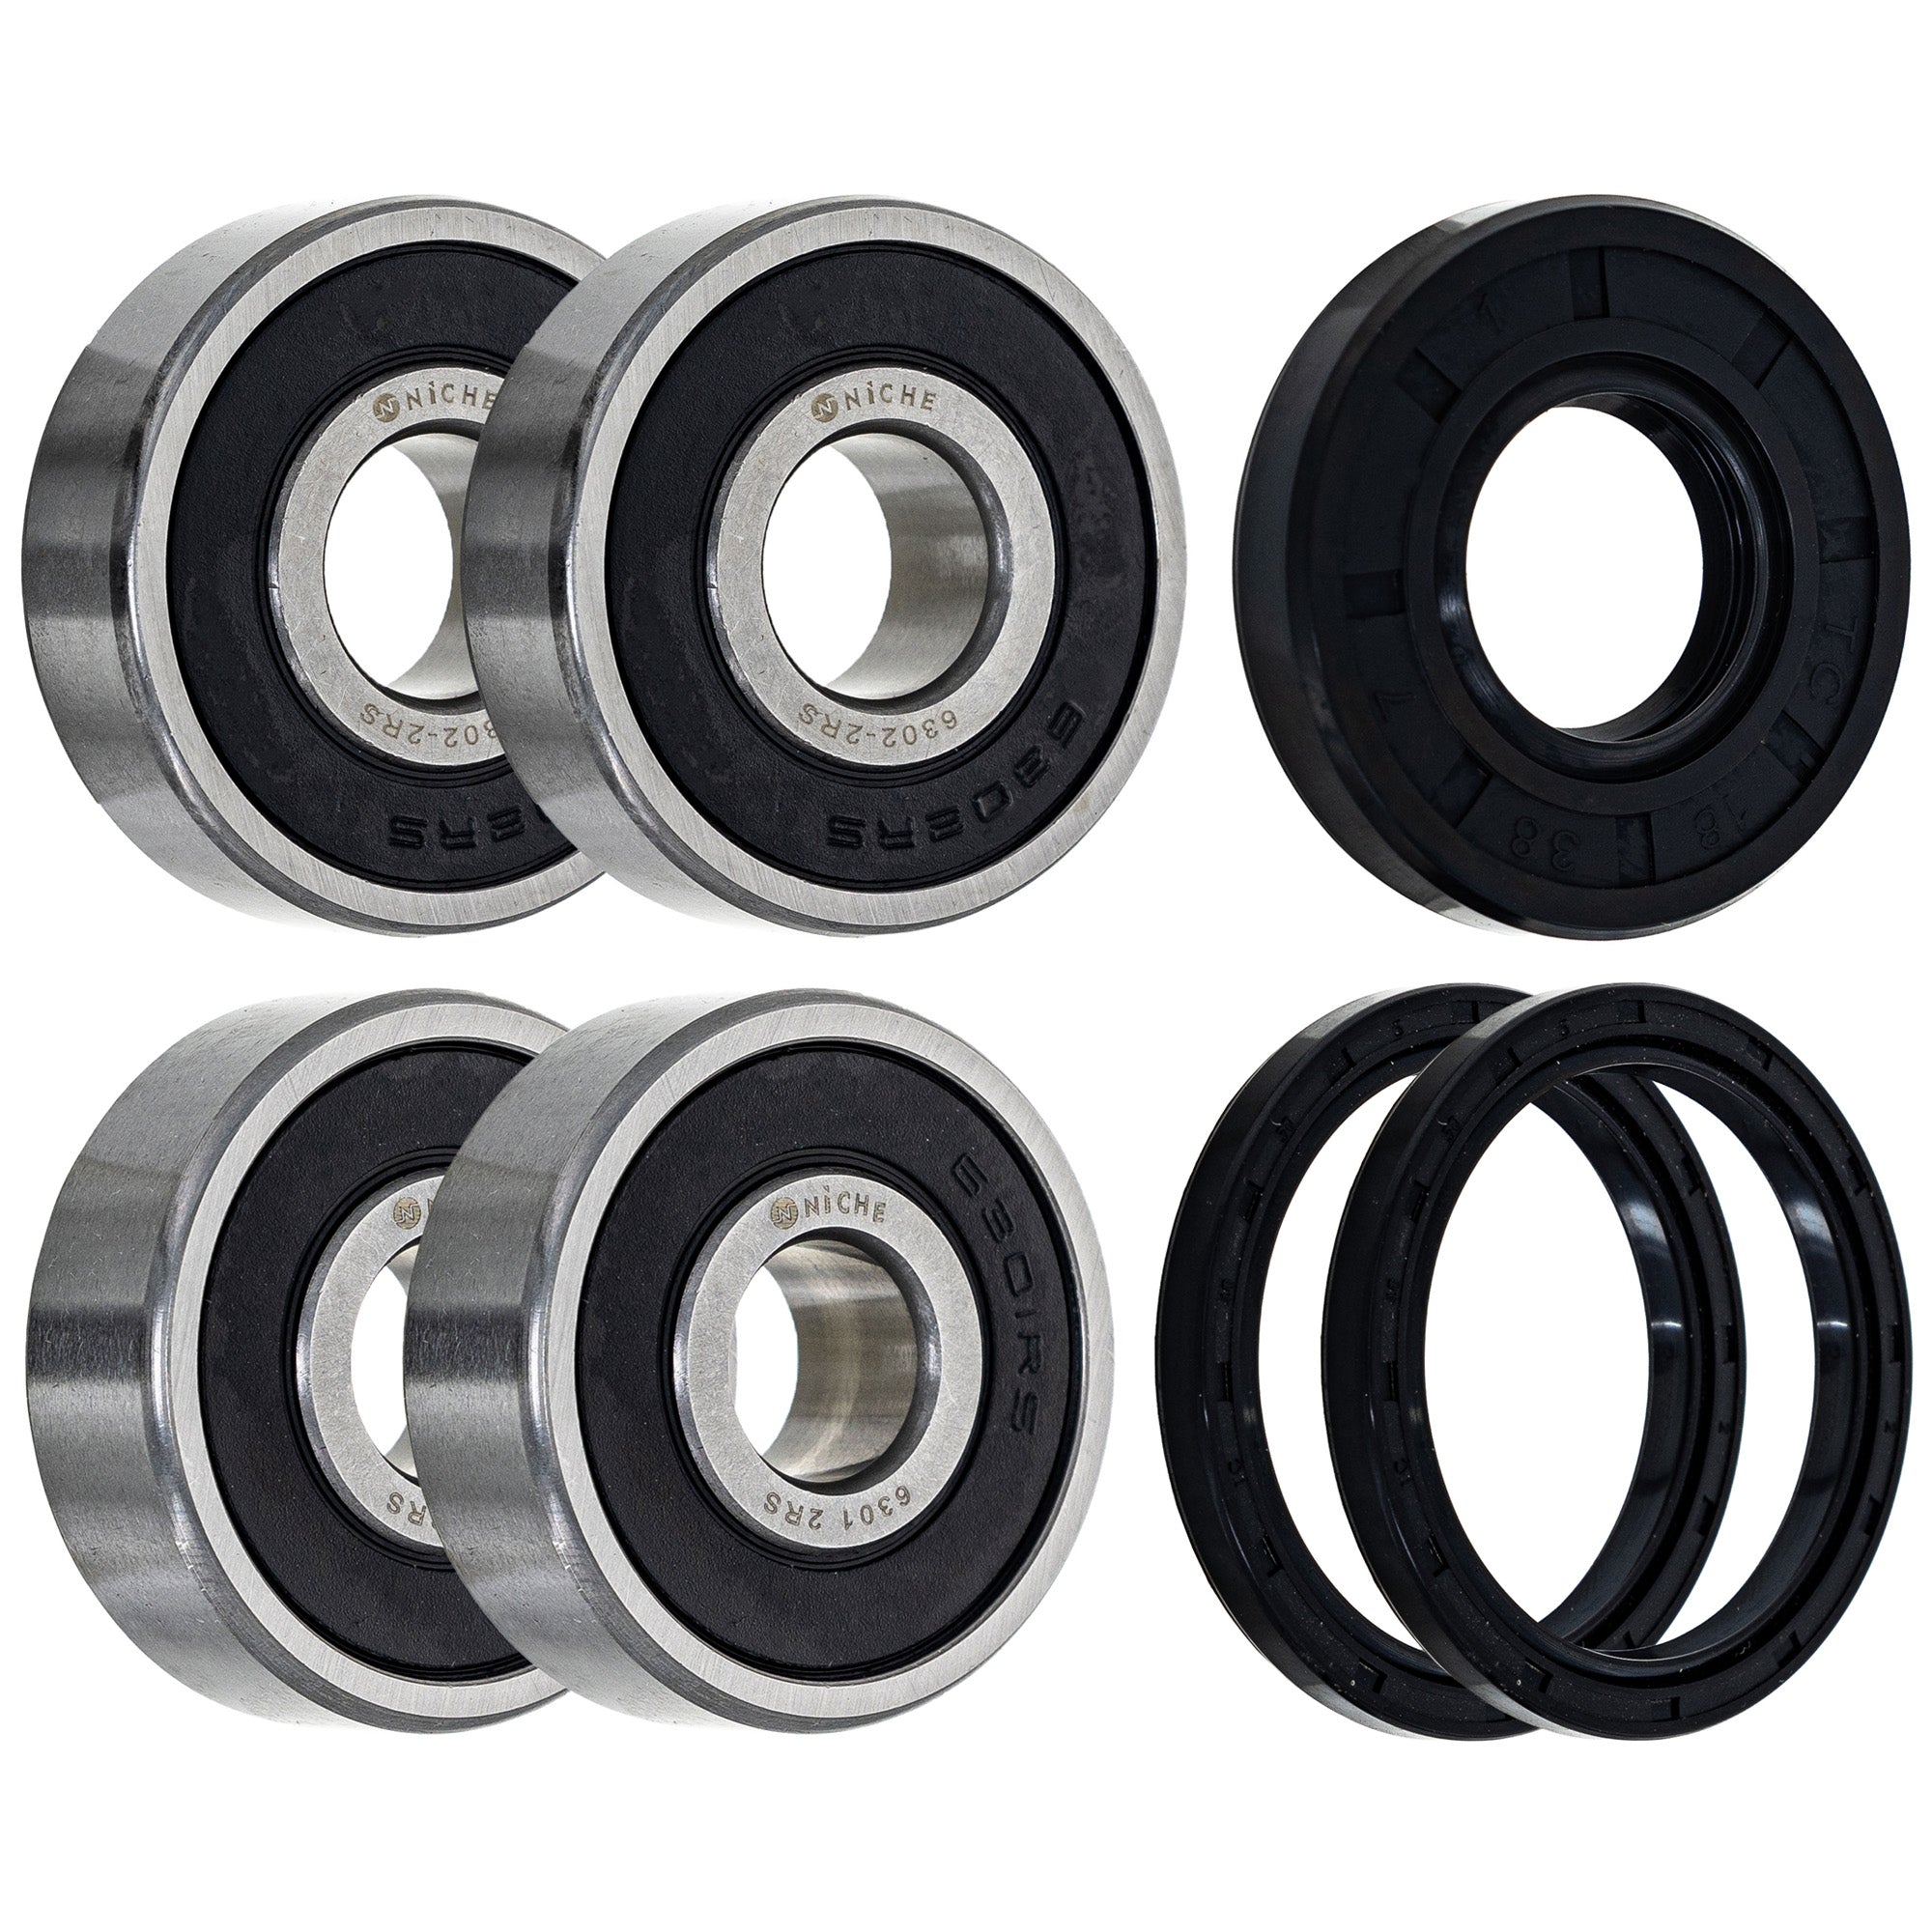 Wheel Bearing Seal Kit for zOTHER RM370 NICHE MK1008688